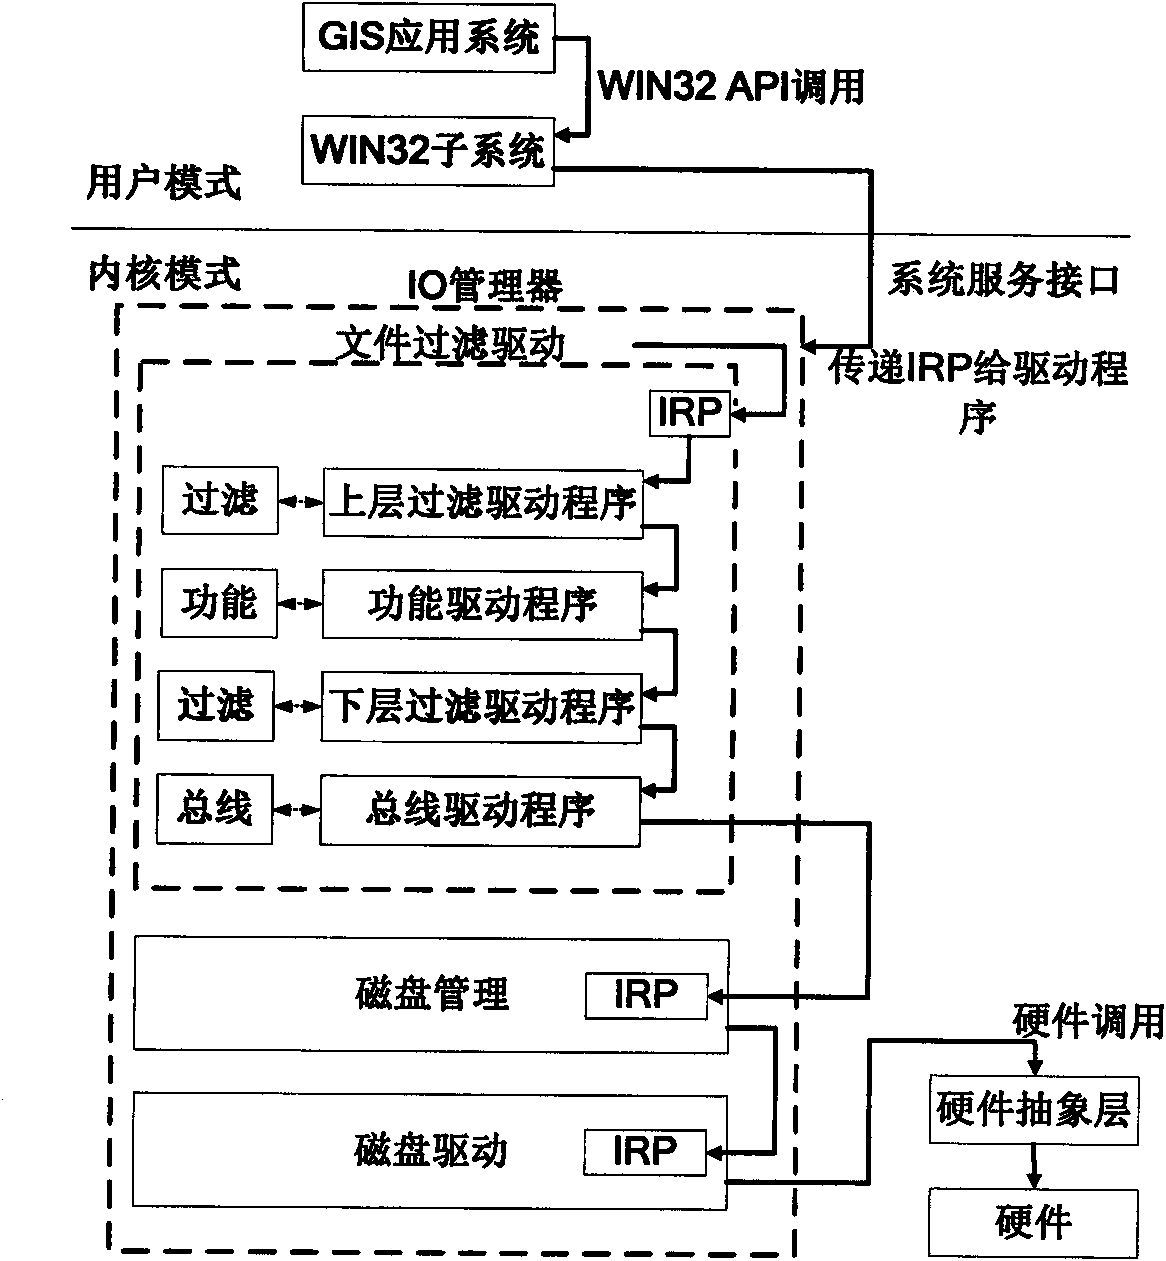 Method for controlling file access of GIS vector data